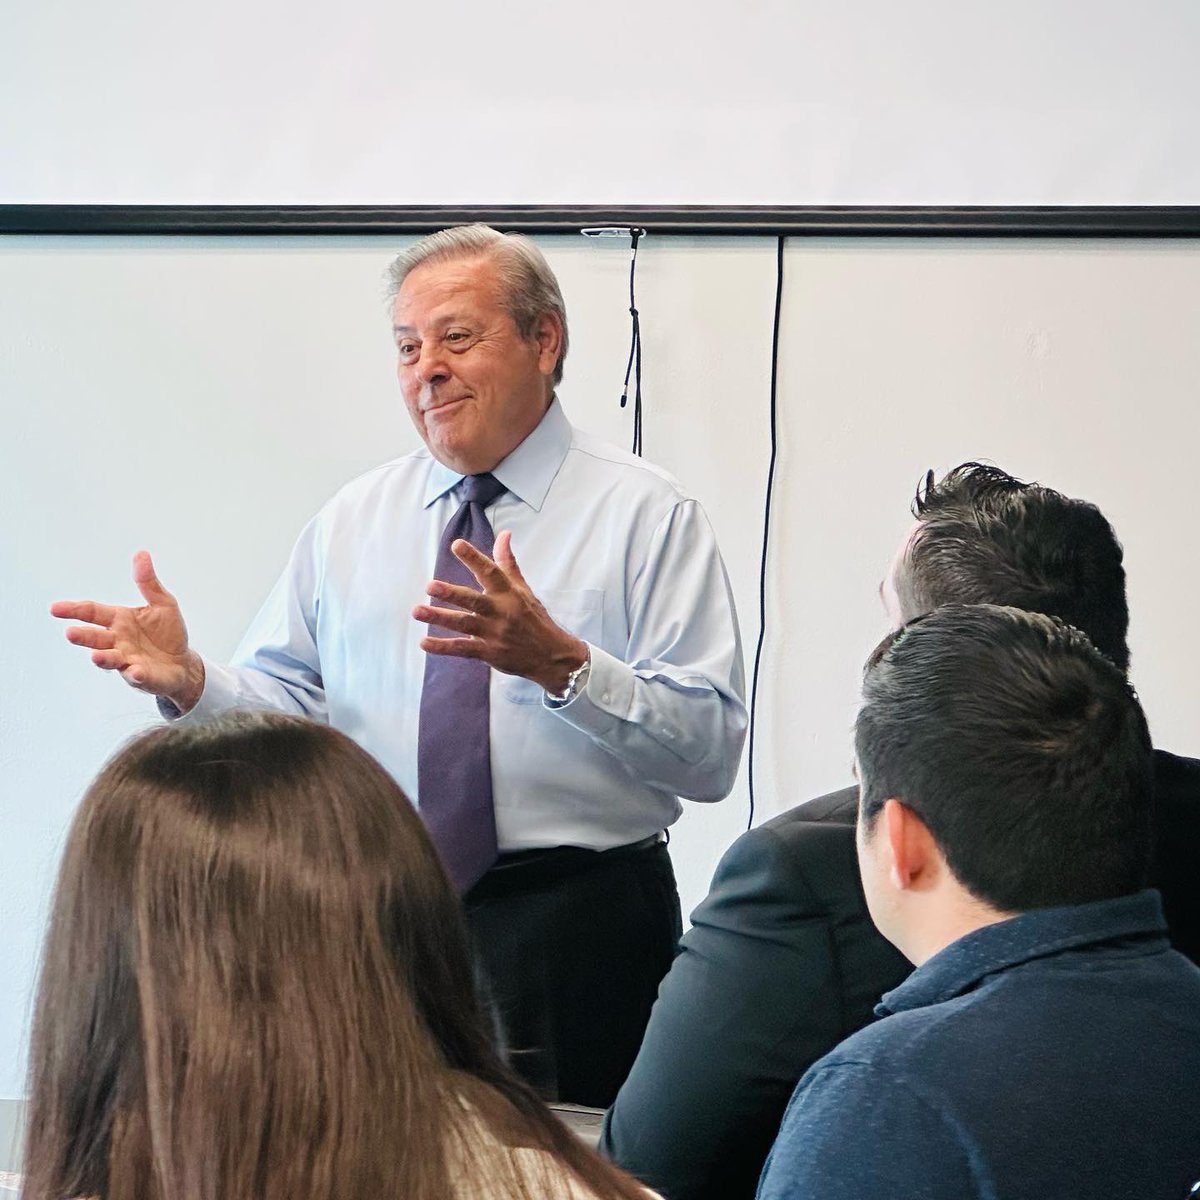 Mentorship is one of the primary goals of our Summer Internship program, and today they had a front-row seat to the wisdom of Attorney Rudy Gonzales.

With a career spanning over 40 years, Rudy has been a partner at the firm since 2010.

At this week’s luncheon, he shared advice